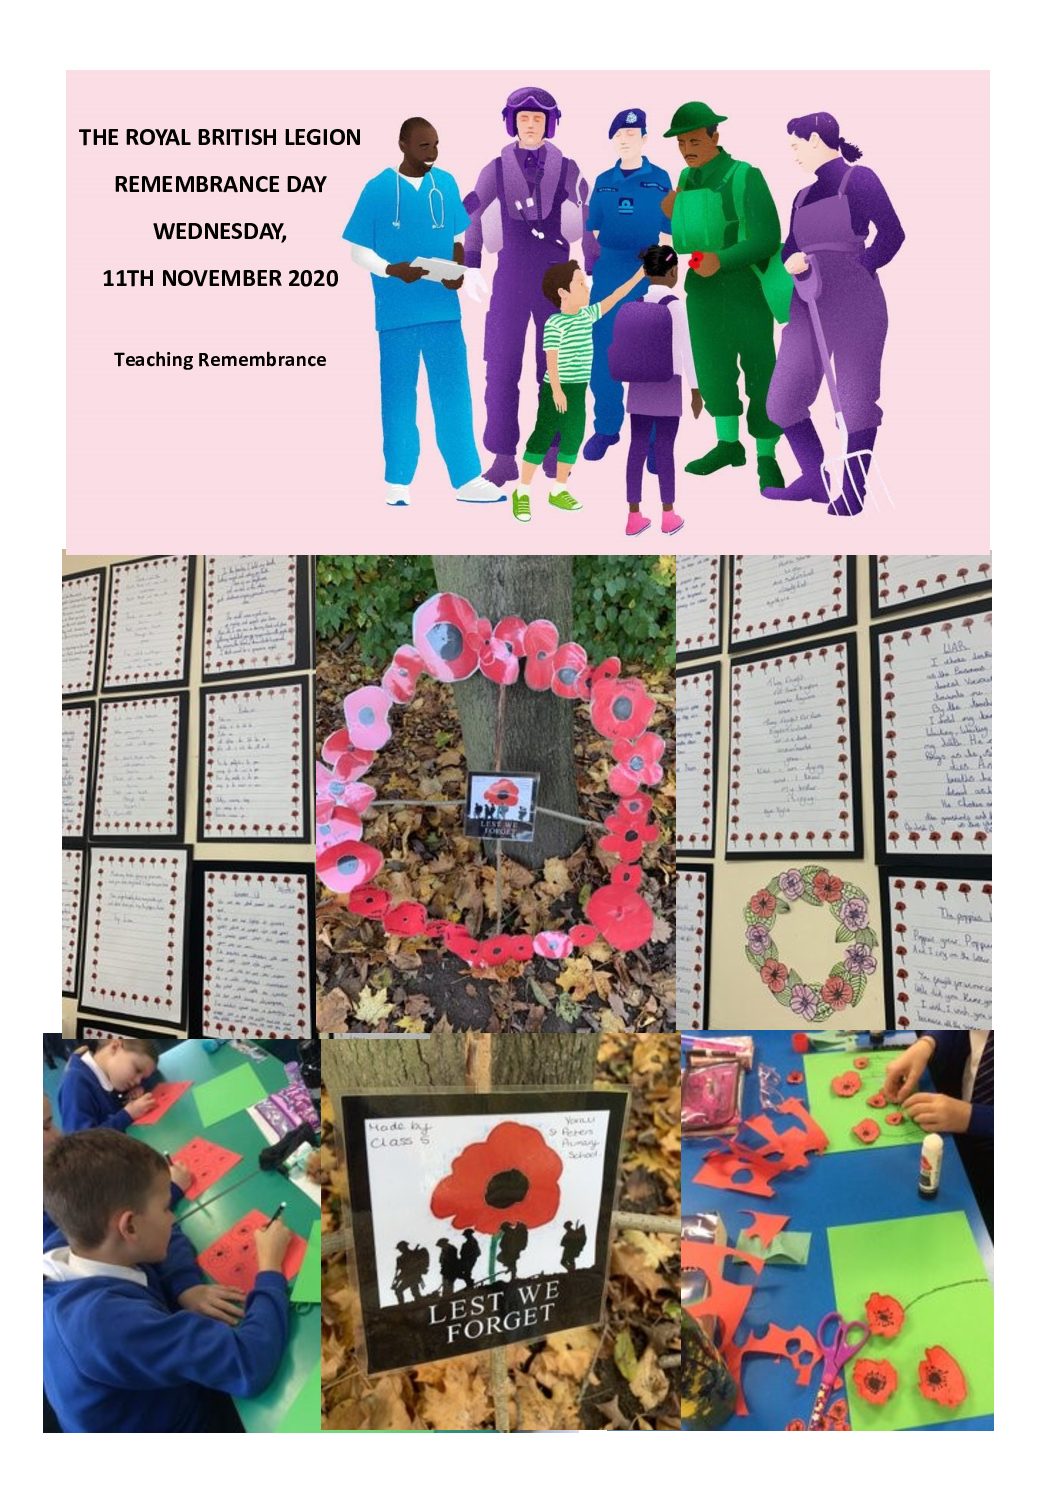 REMEMBRANCE DAY – WEDNESDAY 11TH NOVEMBER 2020